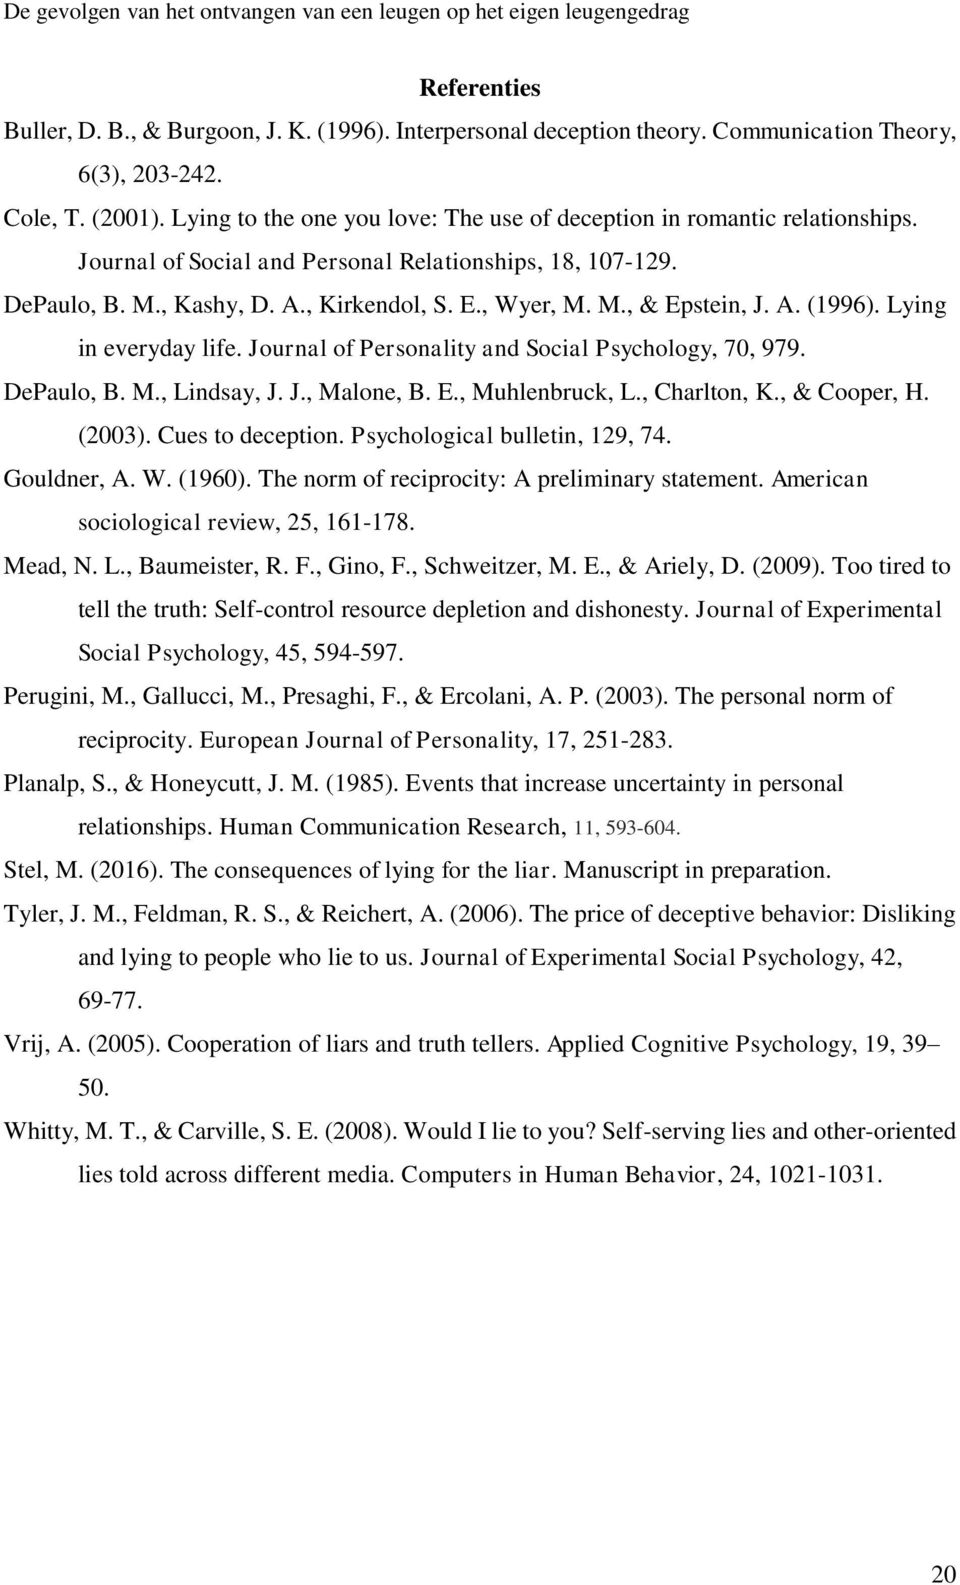 A. (1996). Lying in everyday life. Journal of Personality and Social Psychology, 70, 979. DePaulo, B. M., Lindsay, J. J., Malone, B. E., Muhlenbruck, L., Charlton, K., & Cooper, H. (2003).